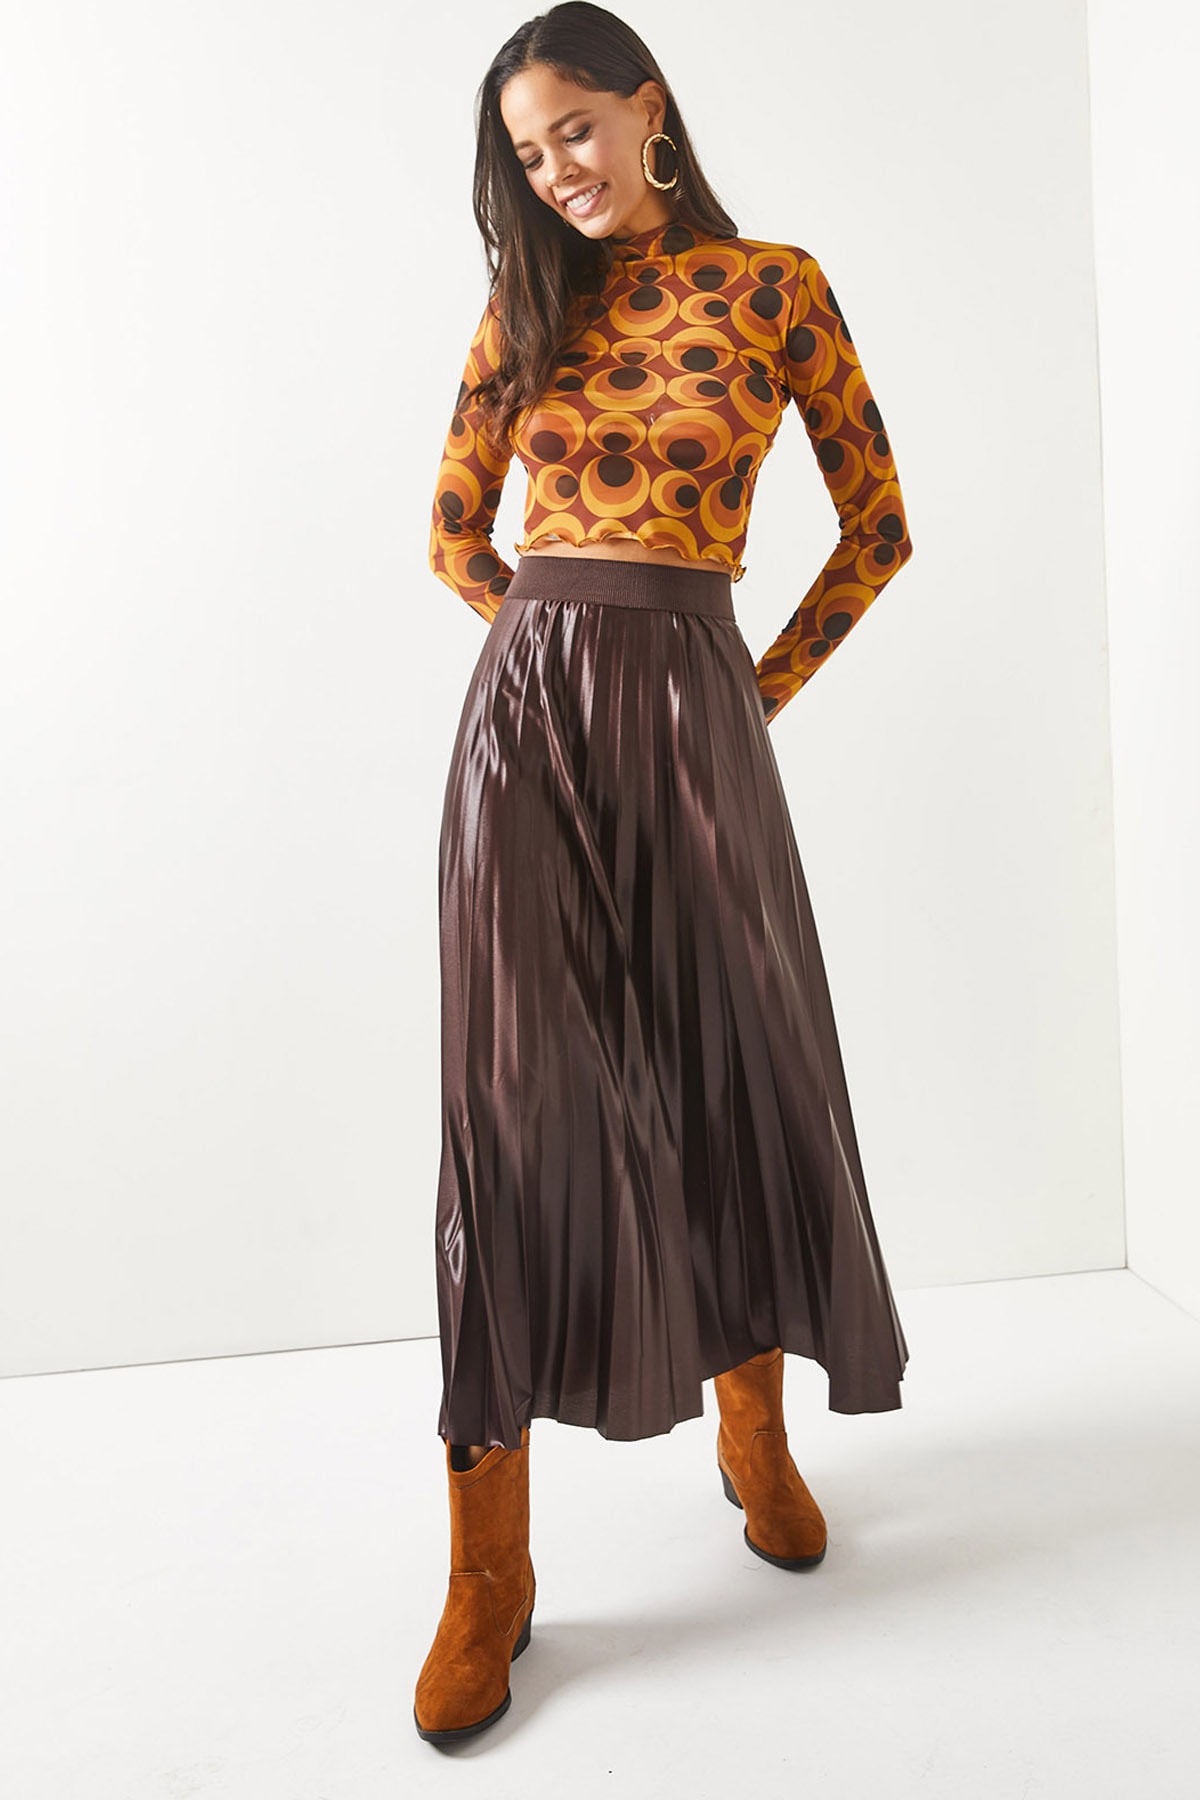 Olalook Women's A-Line Pleated Skirt With A Bitter Brown Leather Look